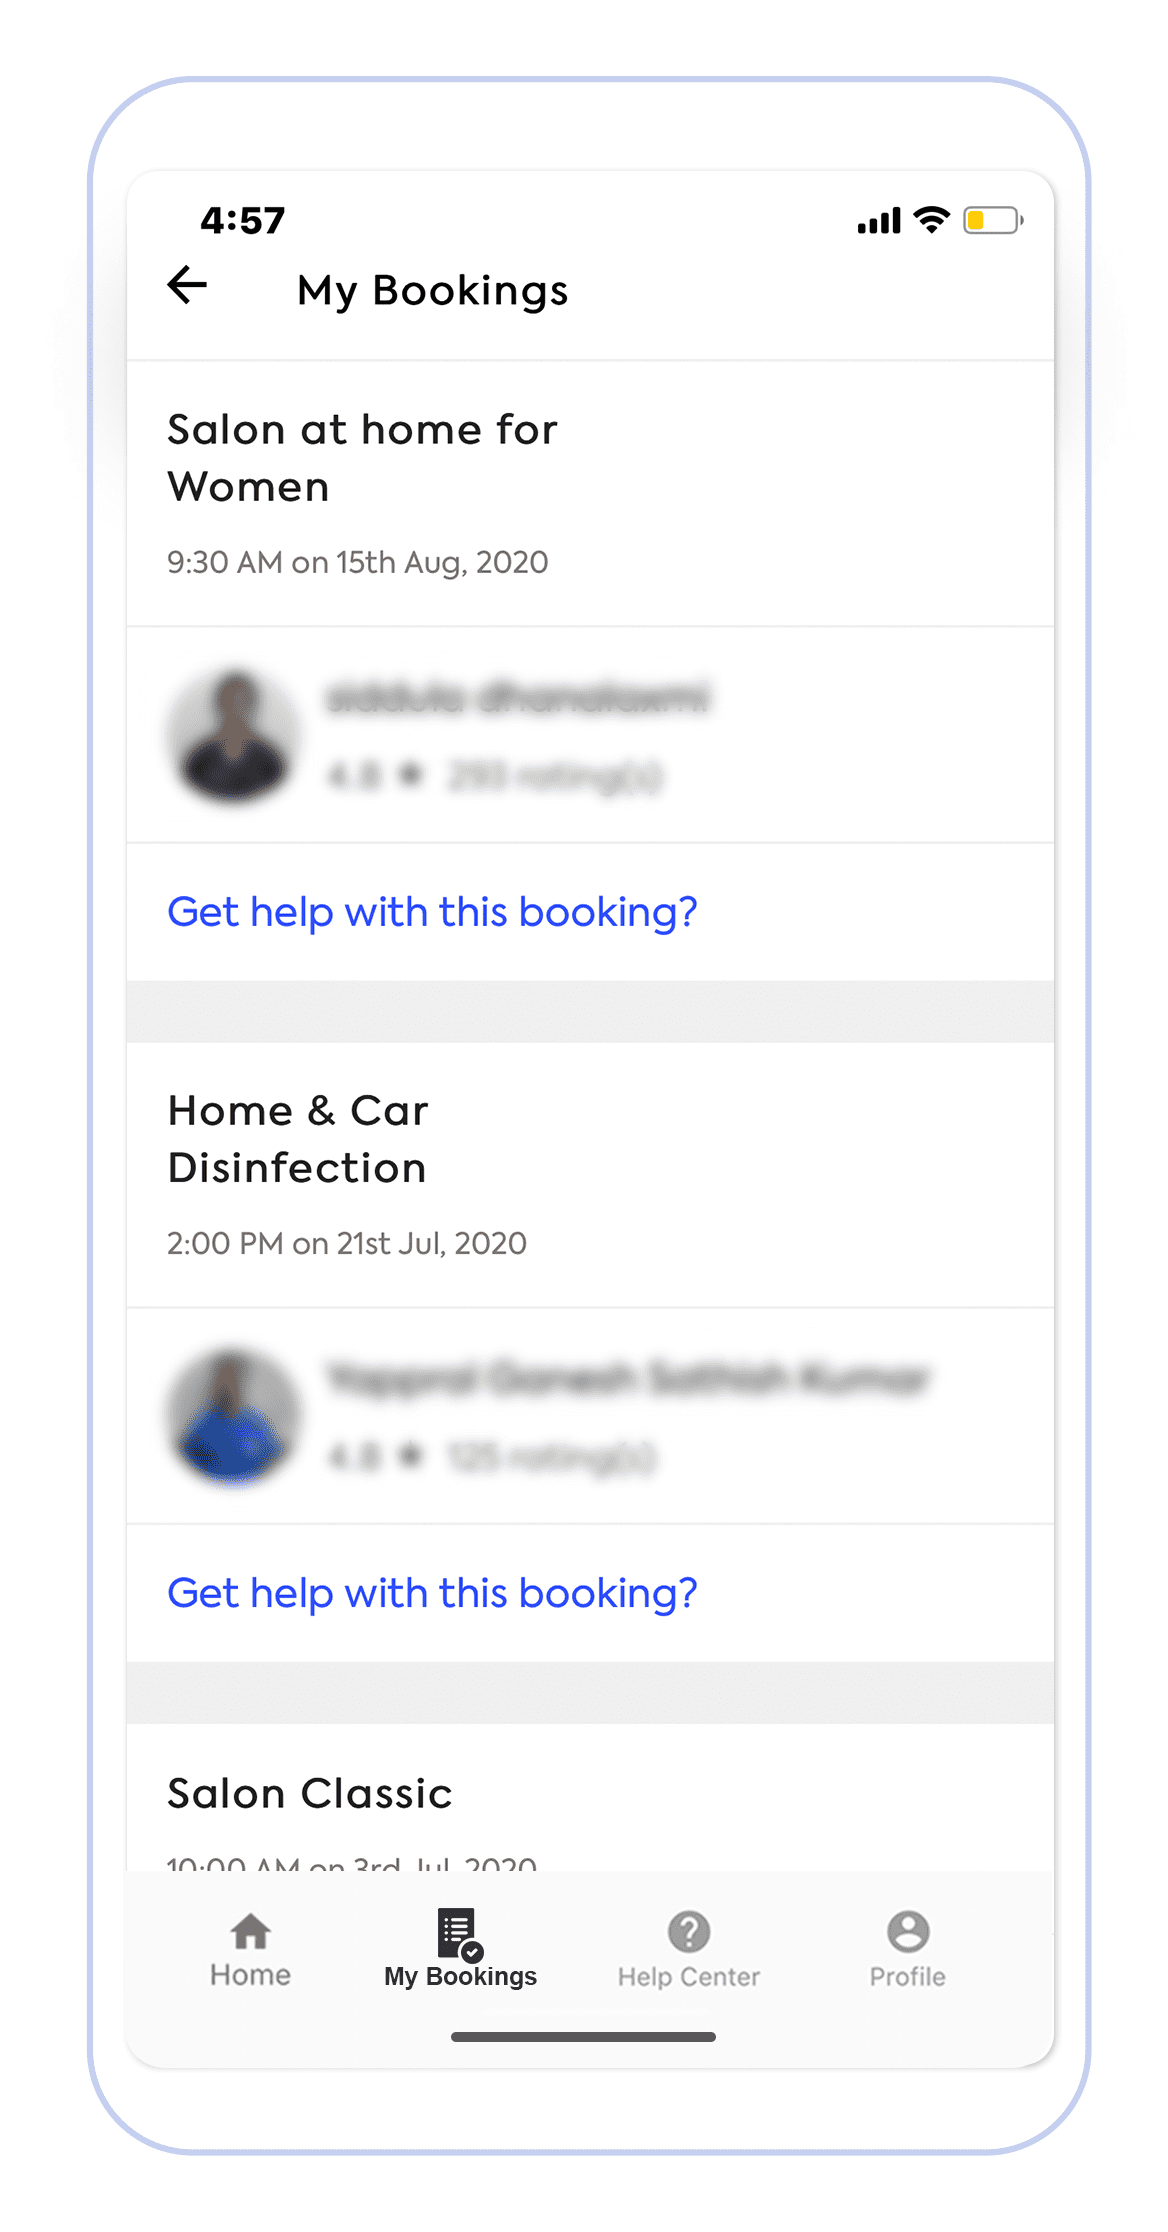 Leverage Cards to share updates on customers' orders or bookings